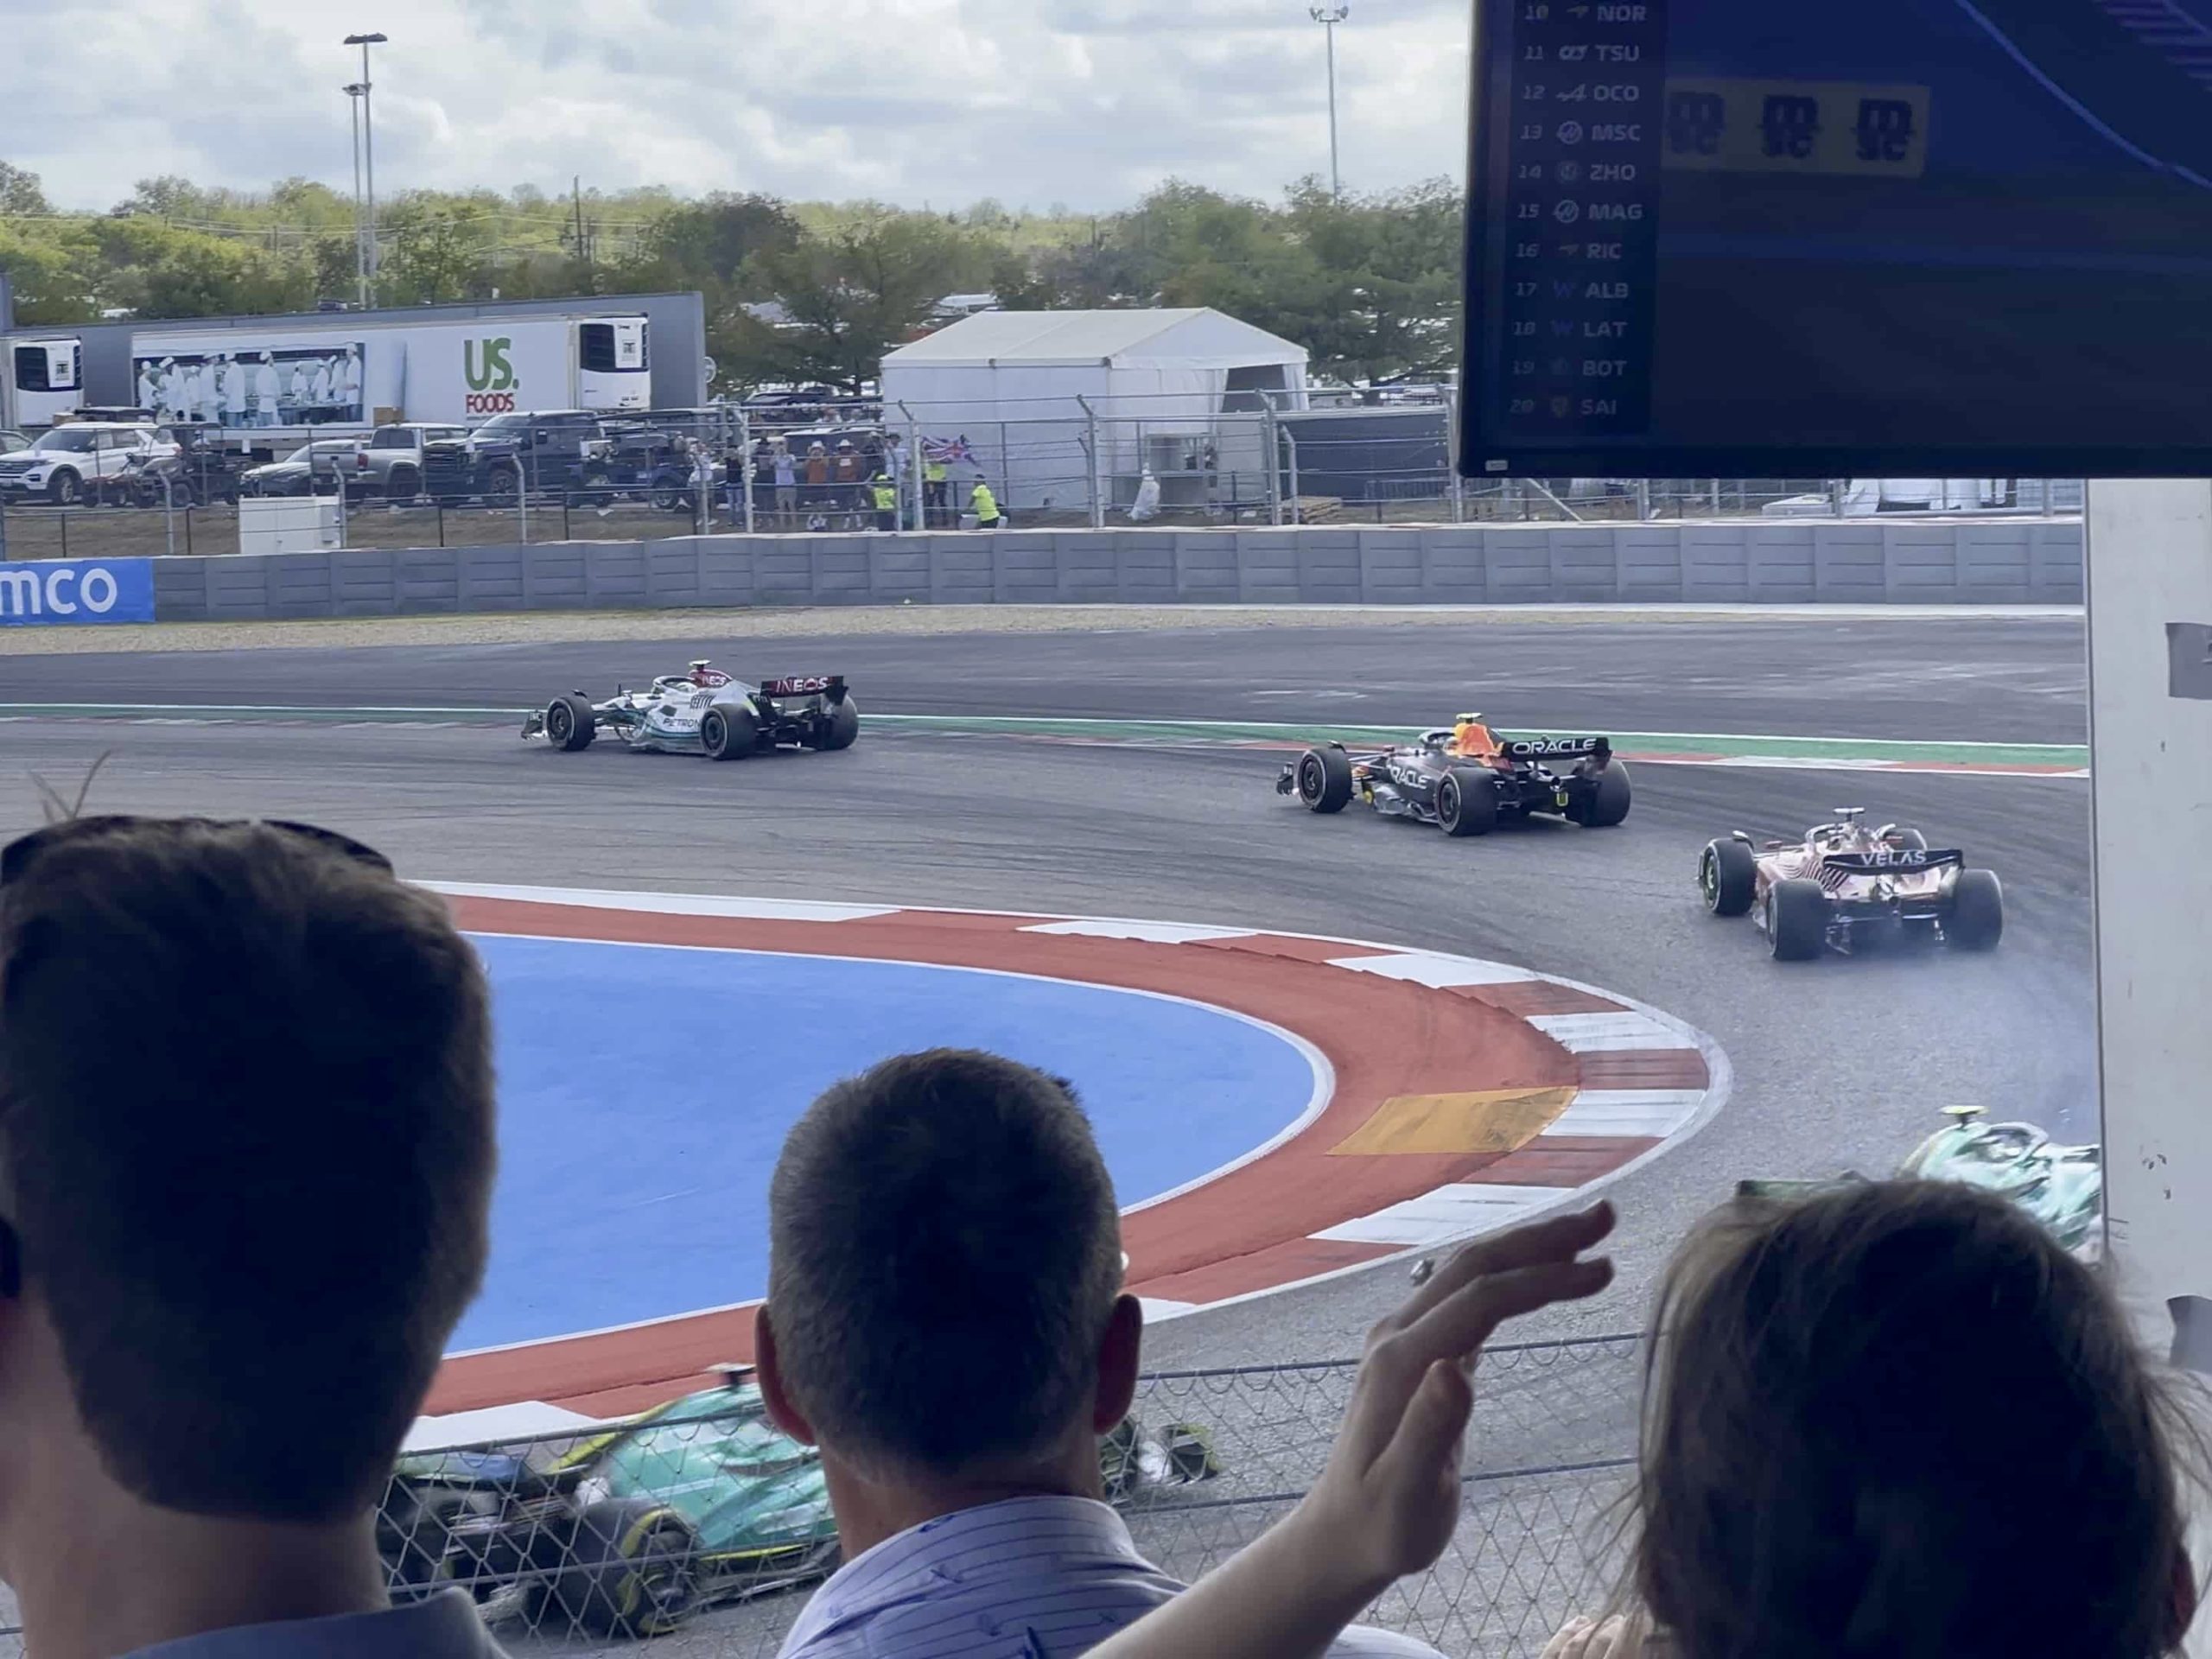 Five F1 cars in close succession through Turn 20 at COTA, watched by a crowd from a grandstand